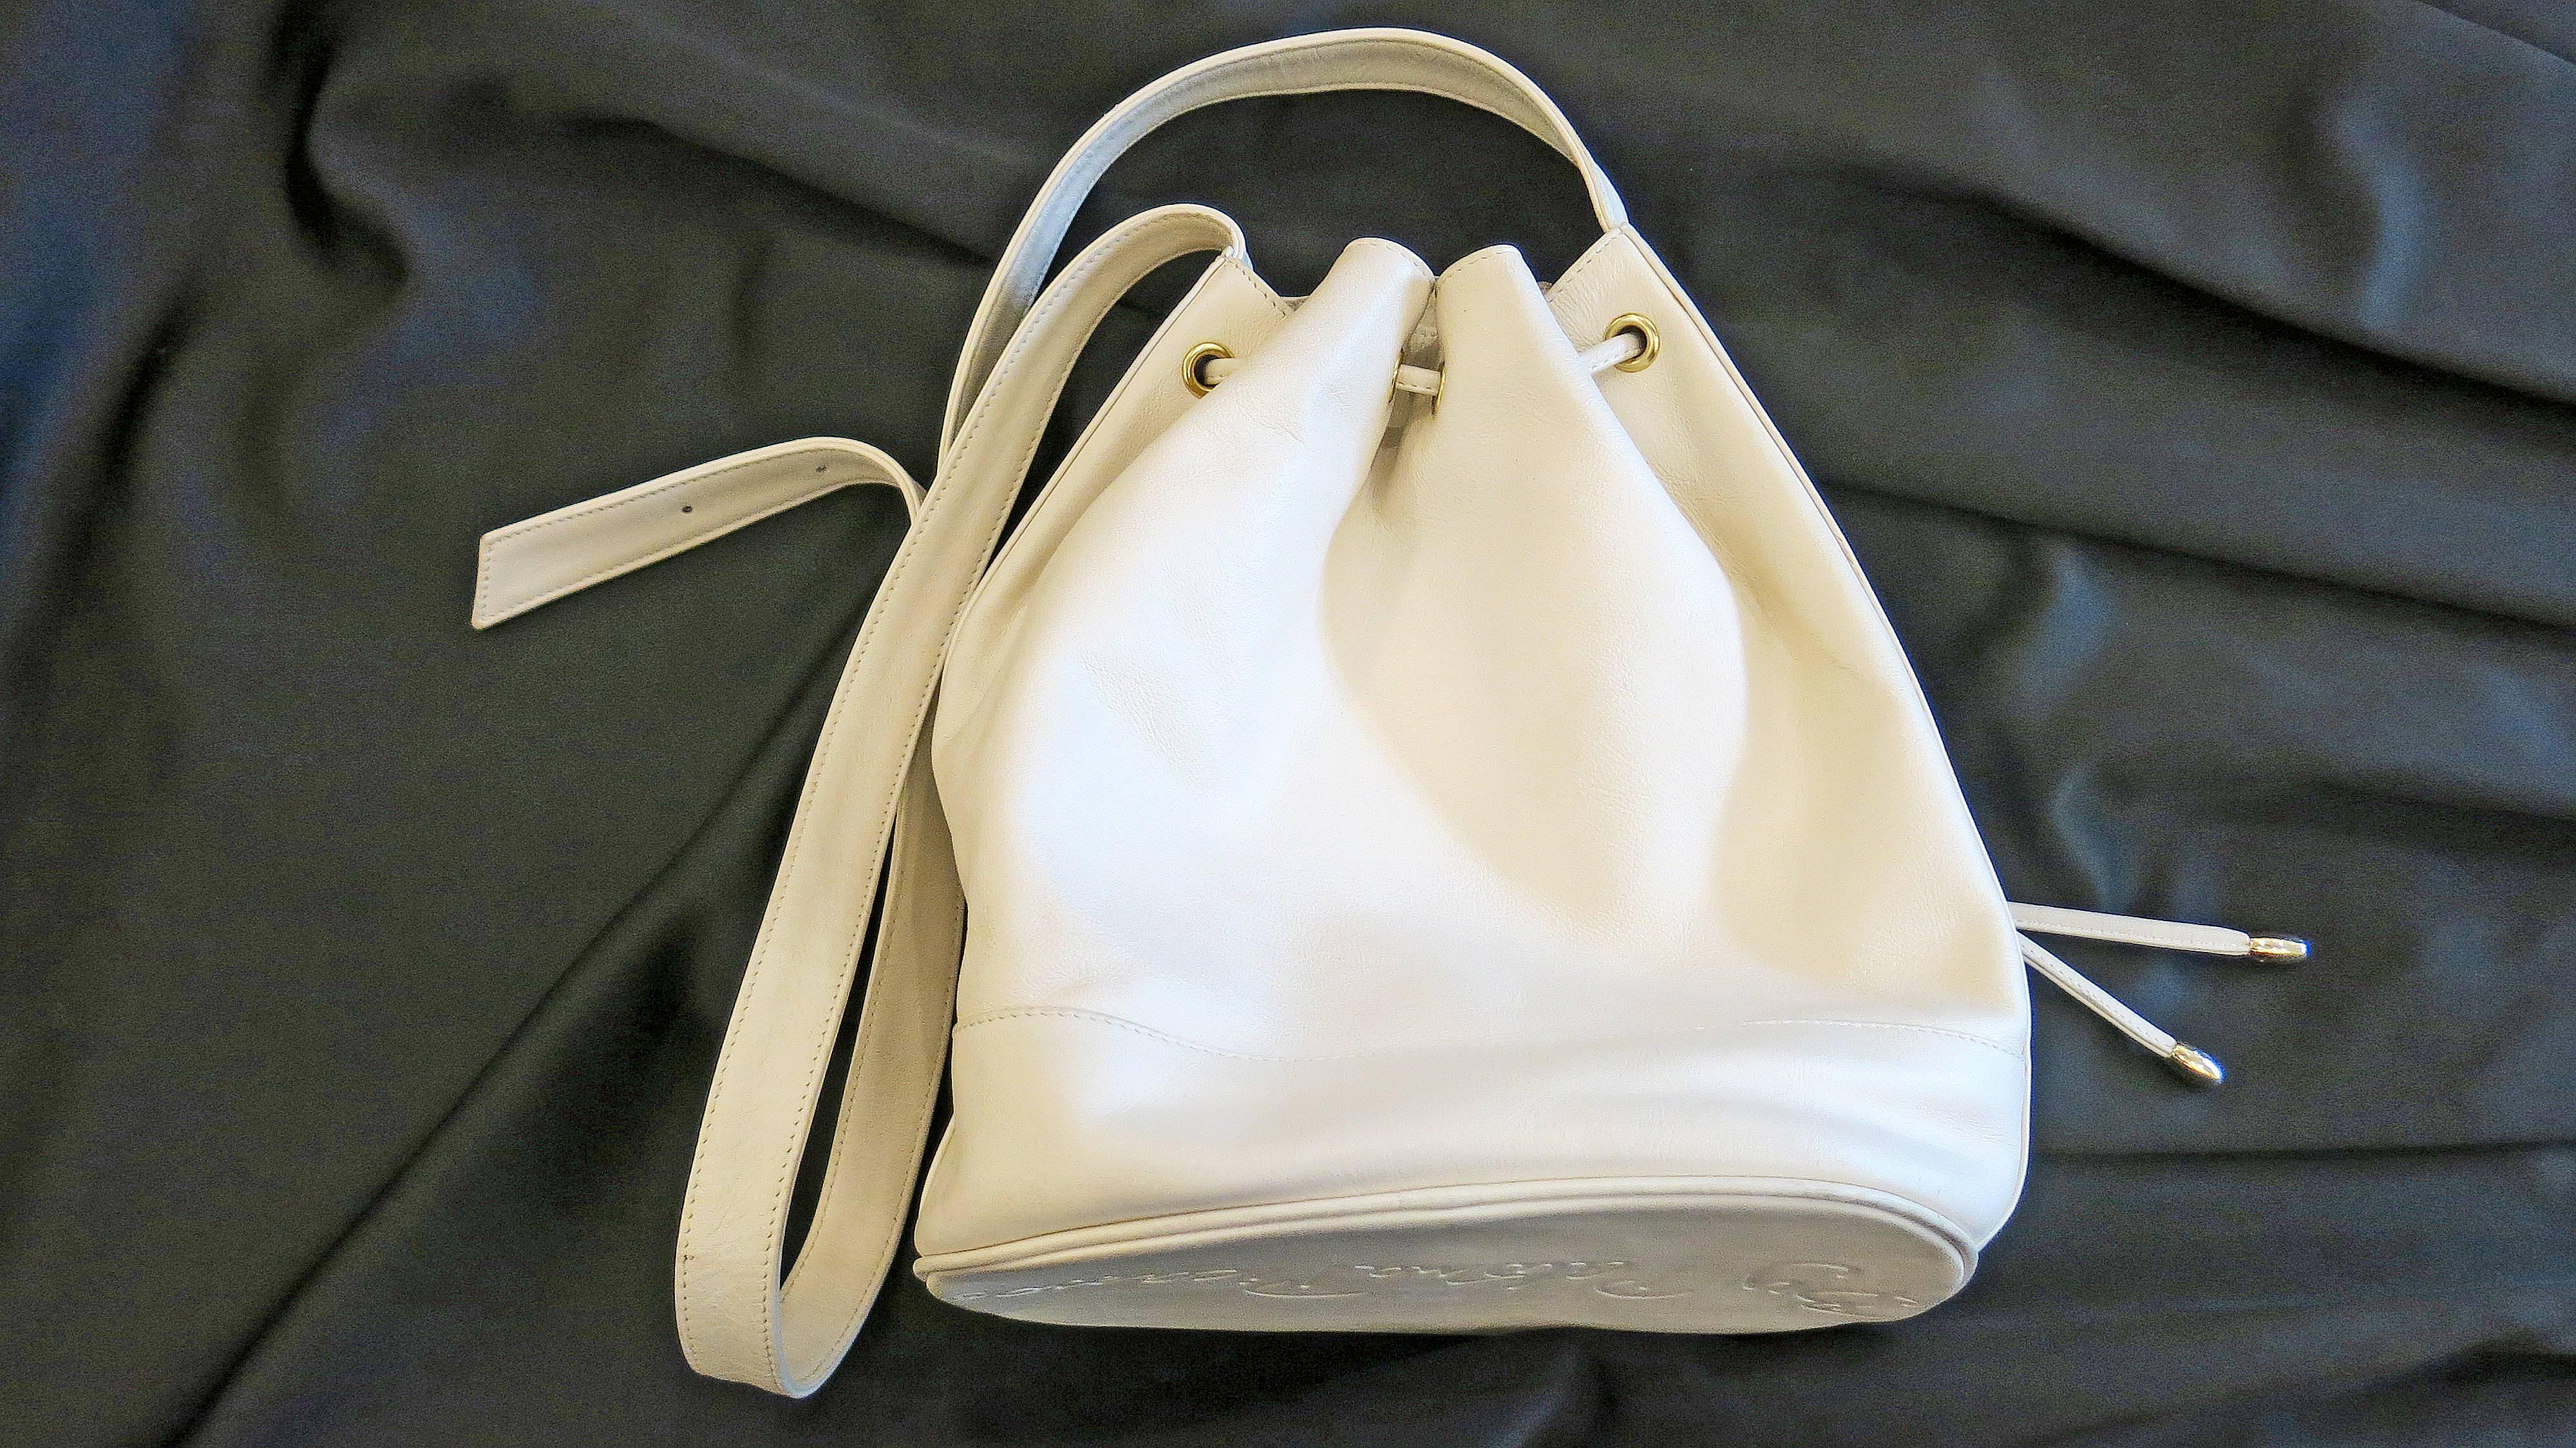 White leather bucket bag with adjustable shoulder strap. Gold tone hardware. Three Paloma Picasso X logos along bottom front of the bag. Paloma Picasso stamped on the clasp of the strap. Inner lining is beige with all over Paloma Picasso logo. One